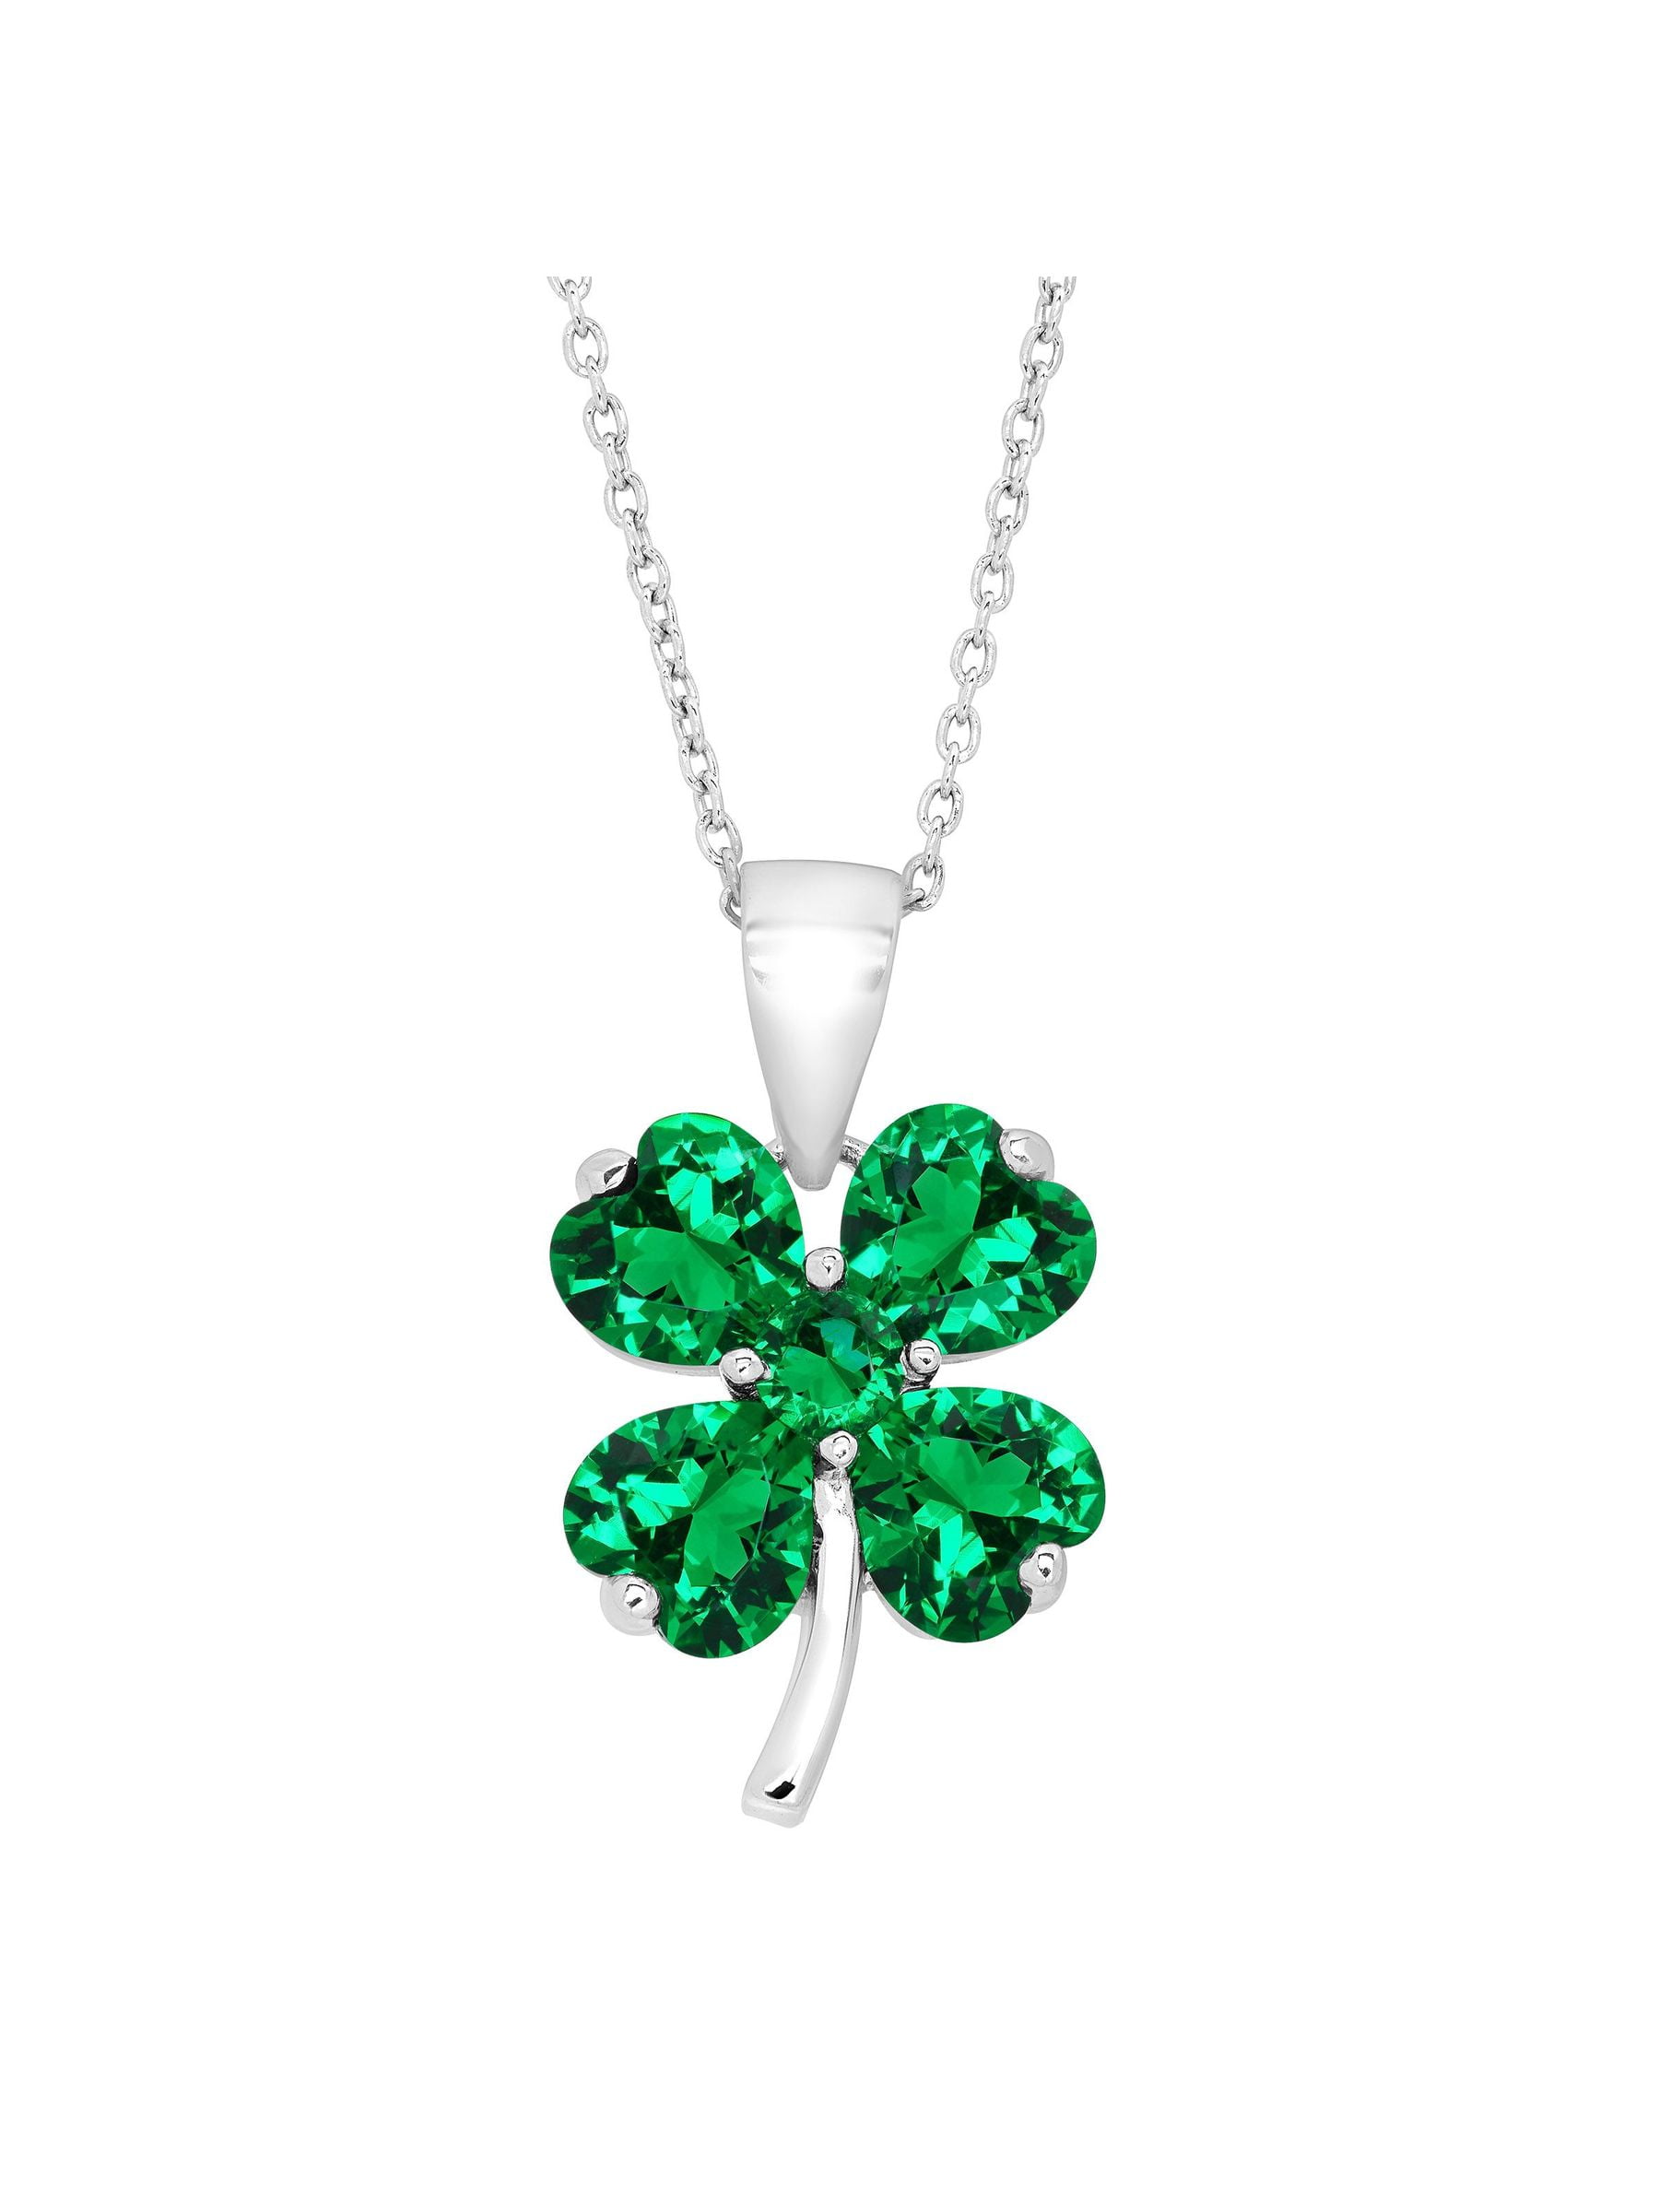 Shamrock Pendant with Green Cubic Zirconia in Sterling Silver 